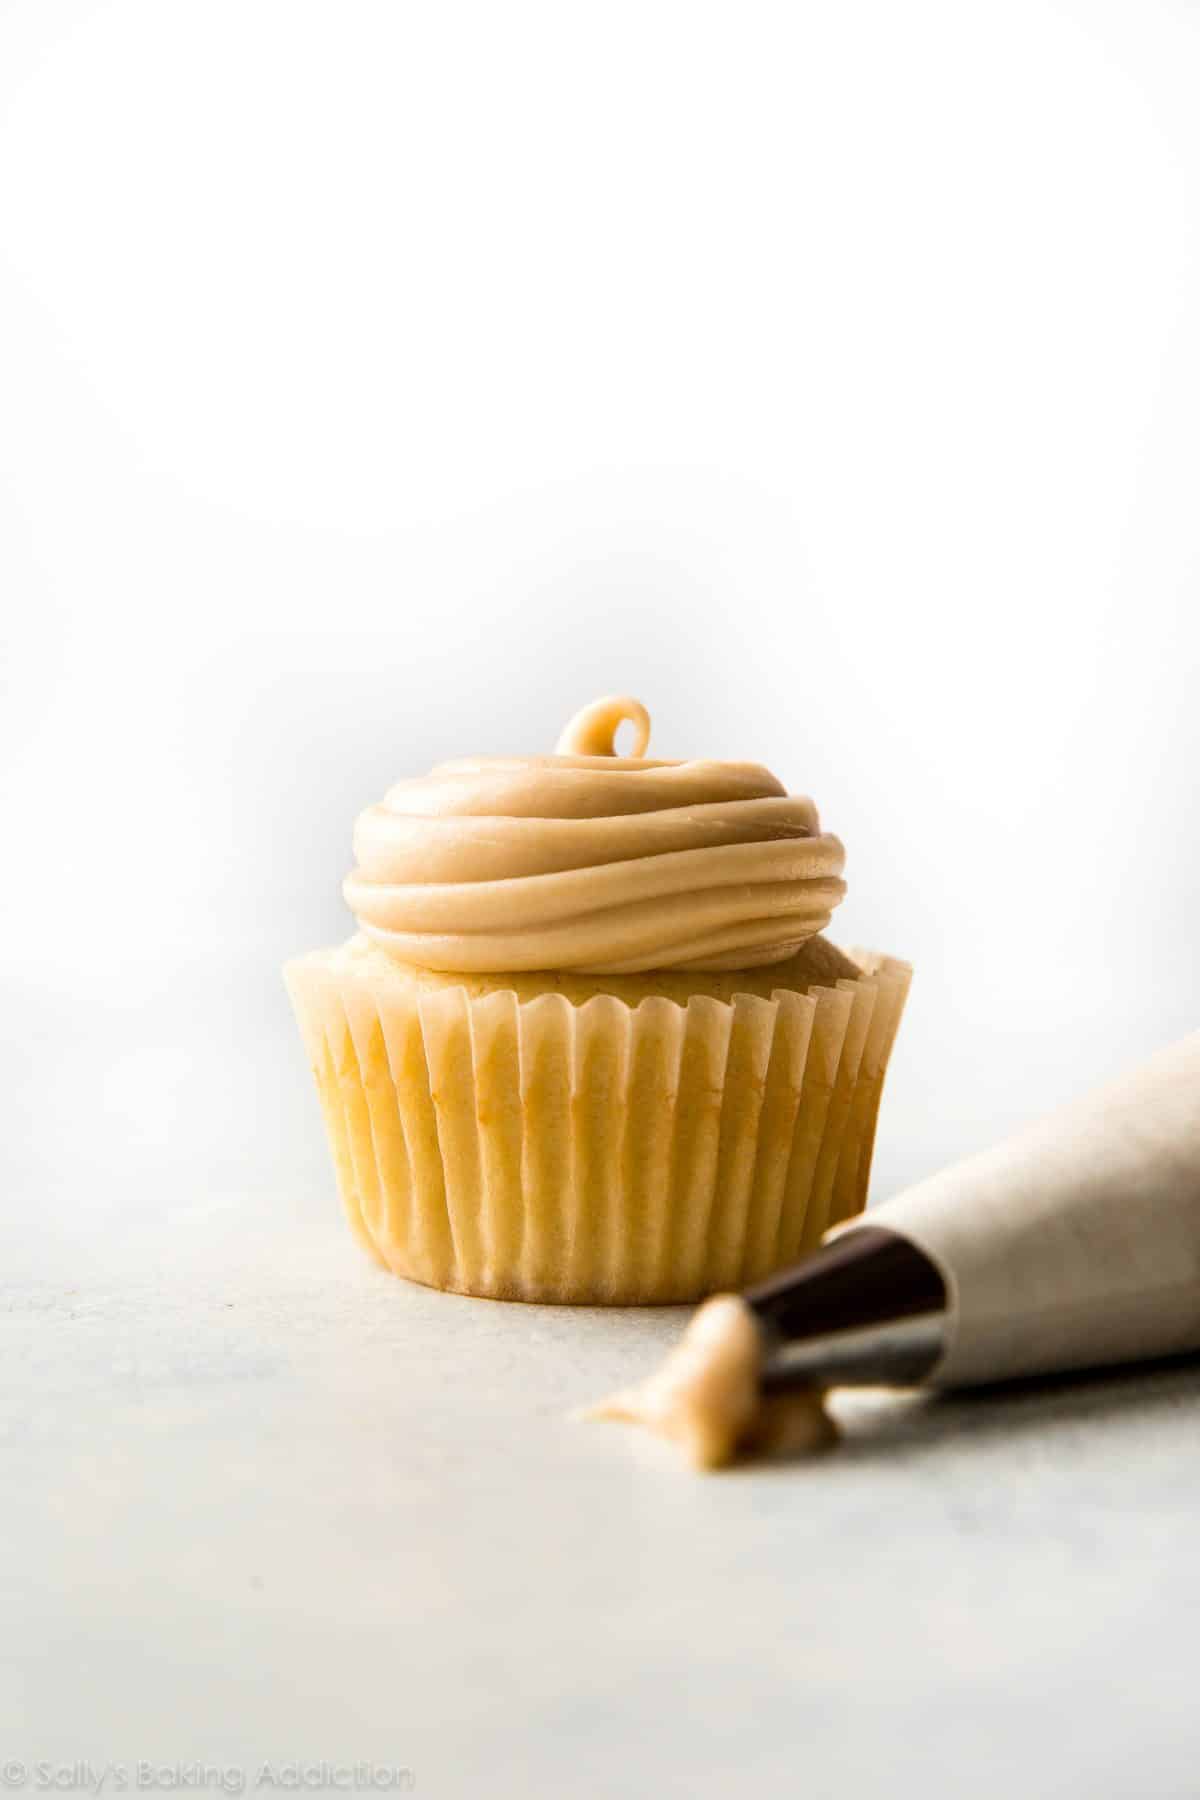 cupcake topped with salted caramel frosting